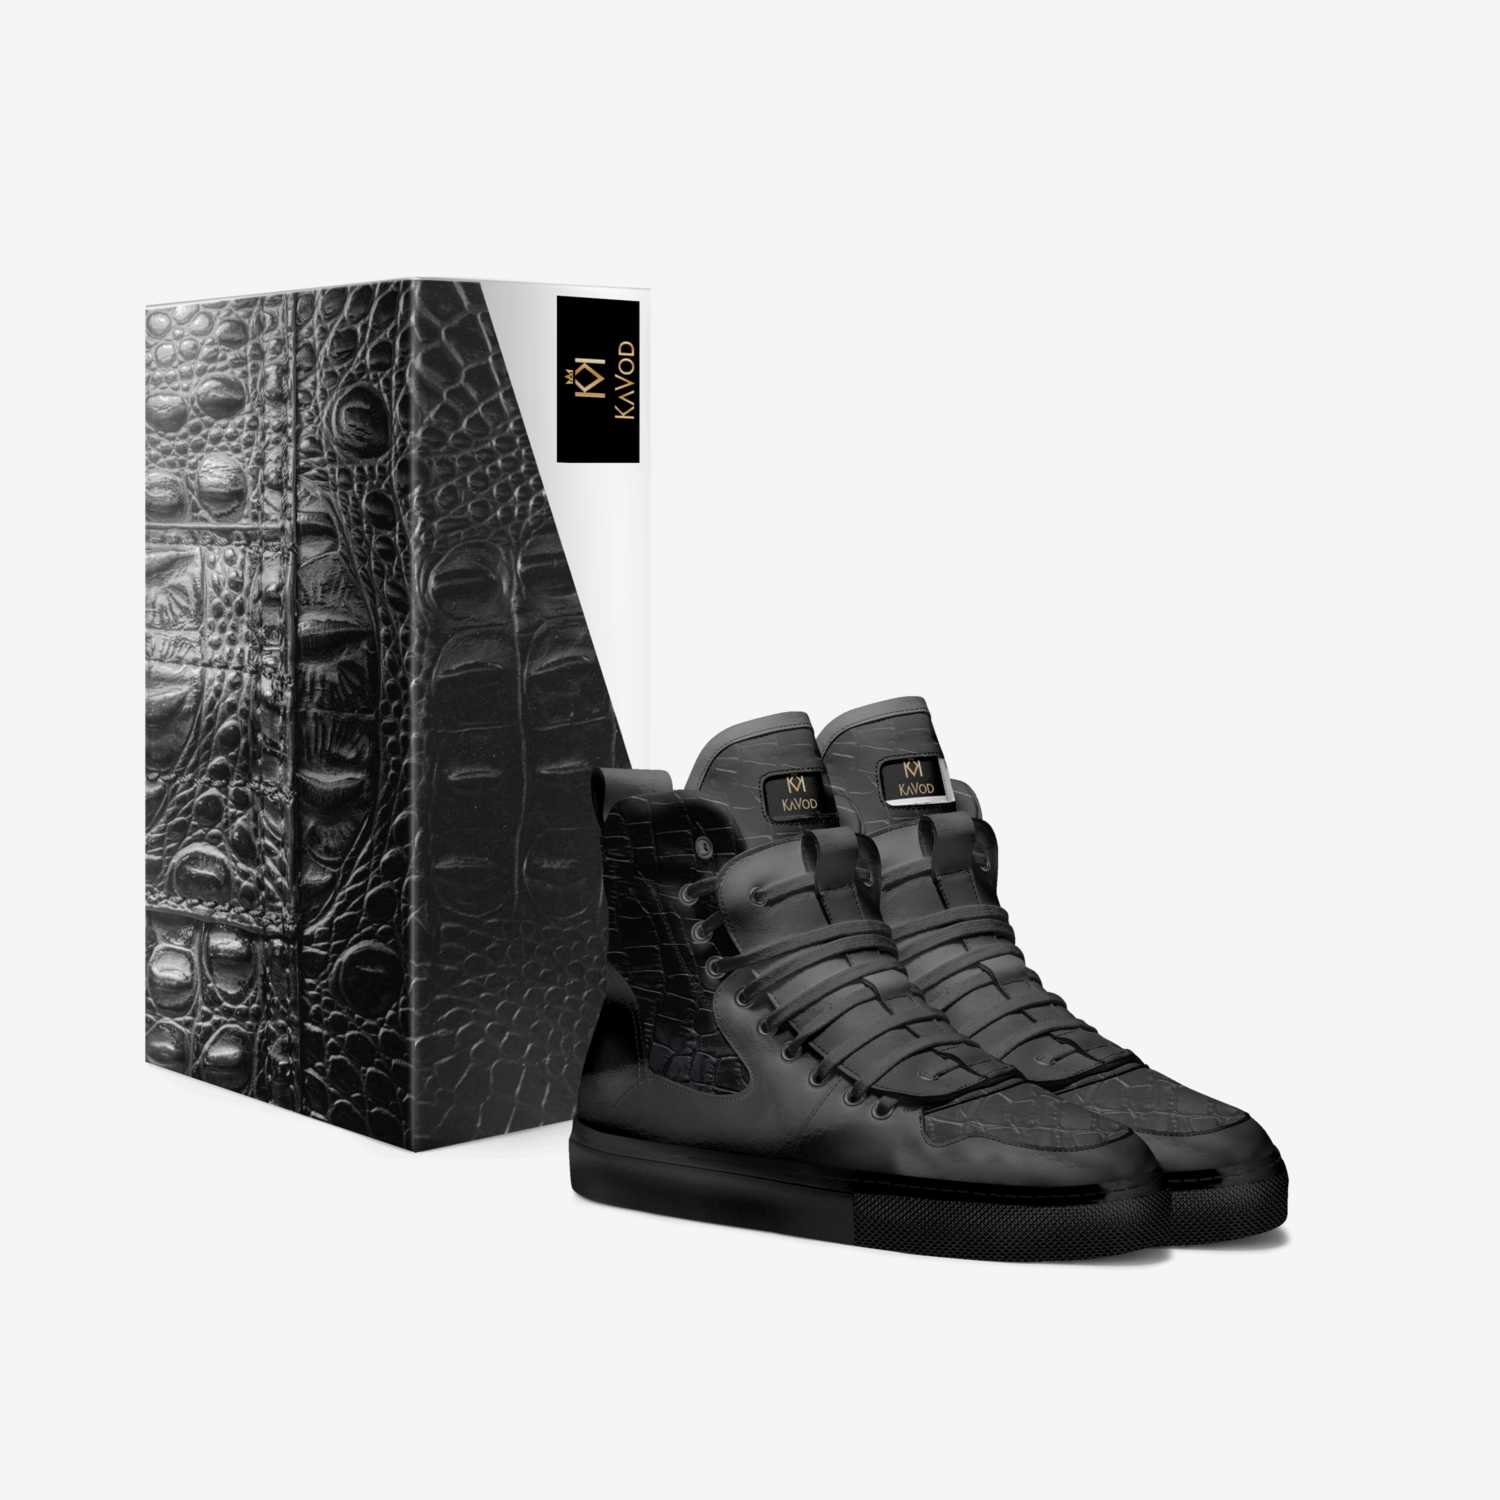 KaVod Collection  custom made in Italy shoes by Naim Collins | Box view